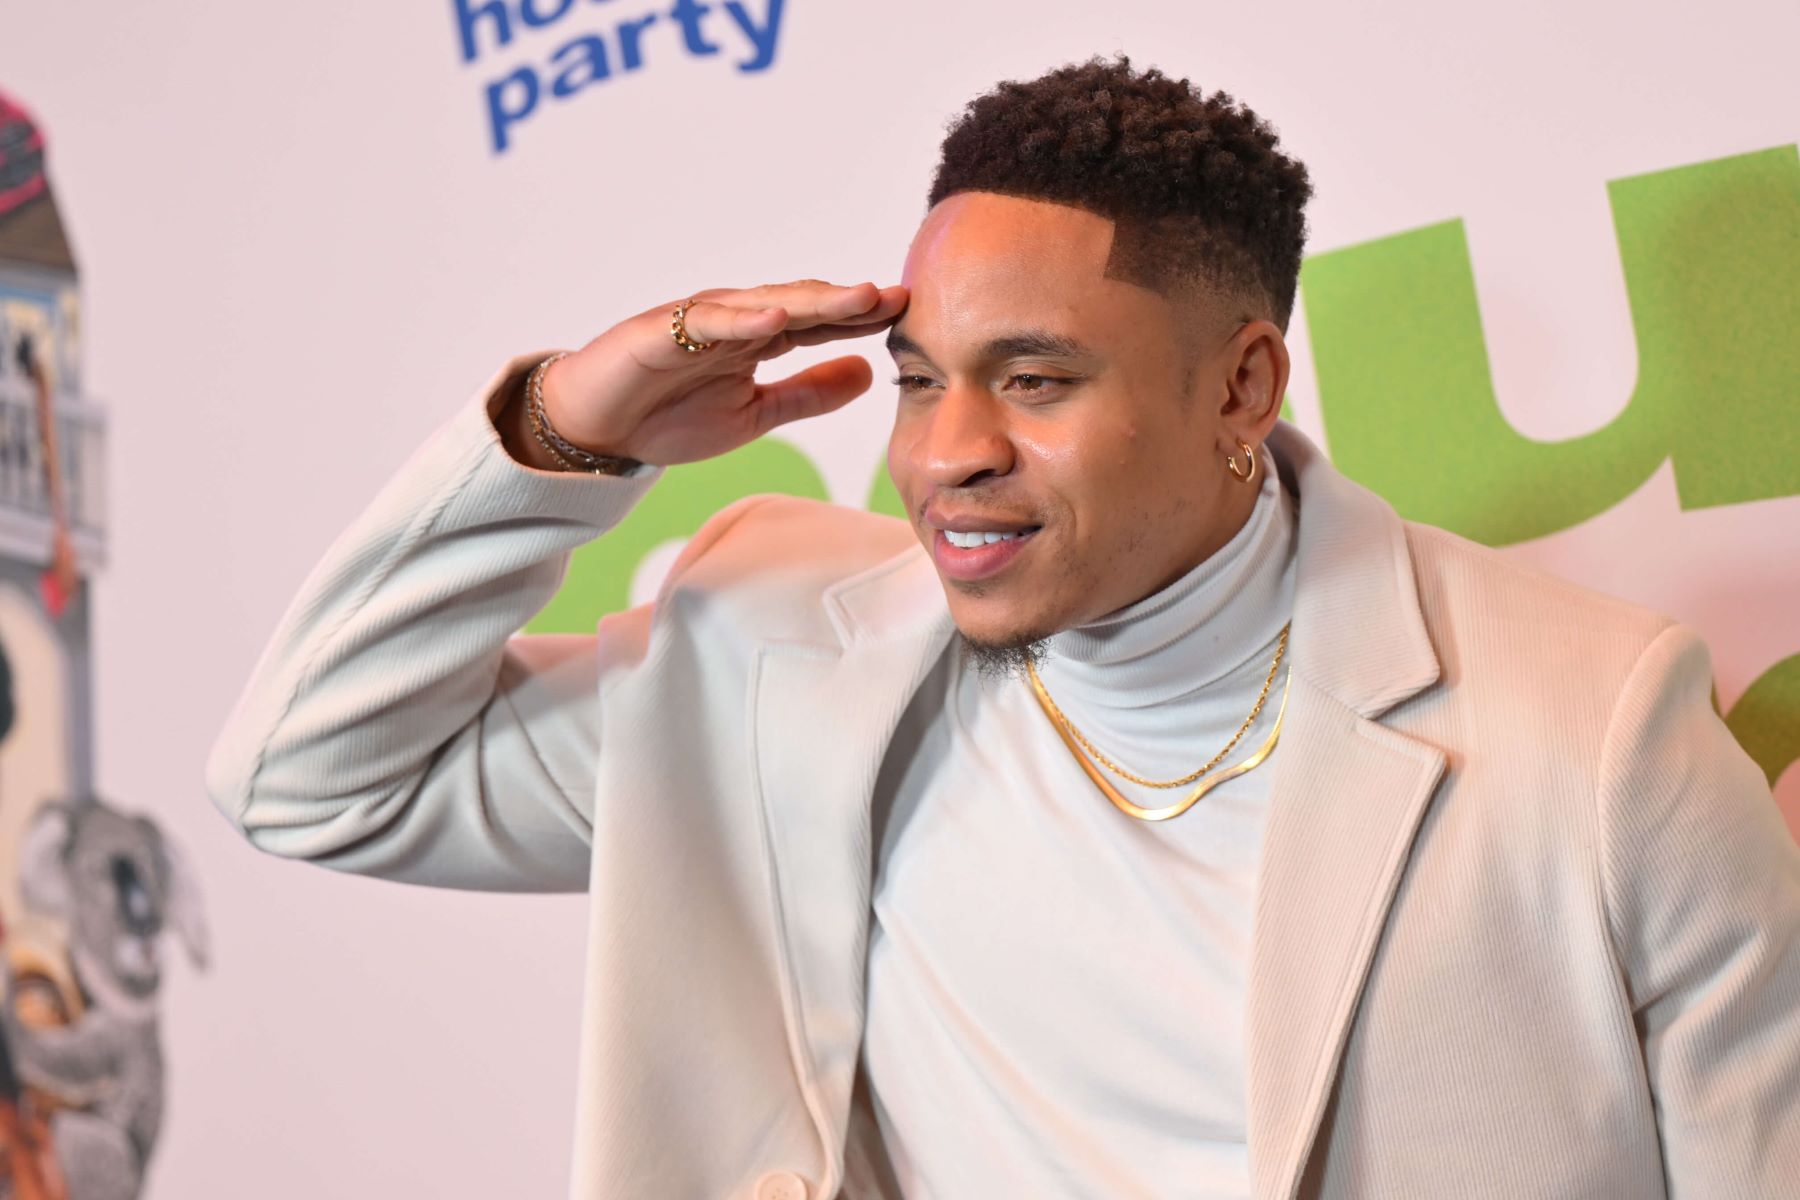 Rotimi, who stars as Charles in 'Will Trent' on ABC, wears a white suit jacket over a white turtleneck and gold chain necklace.